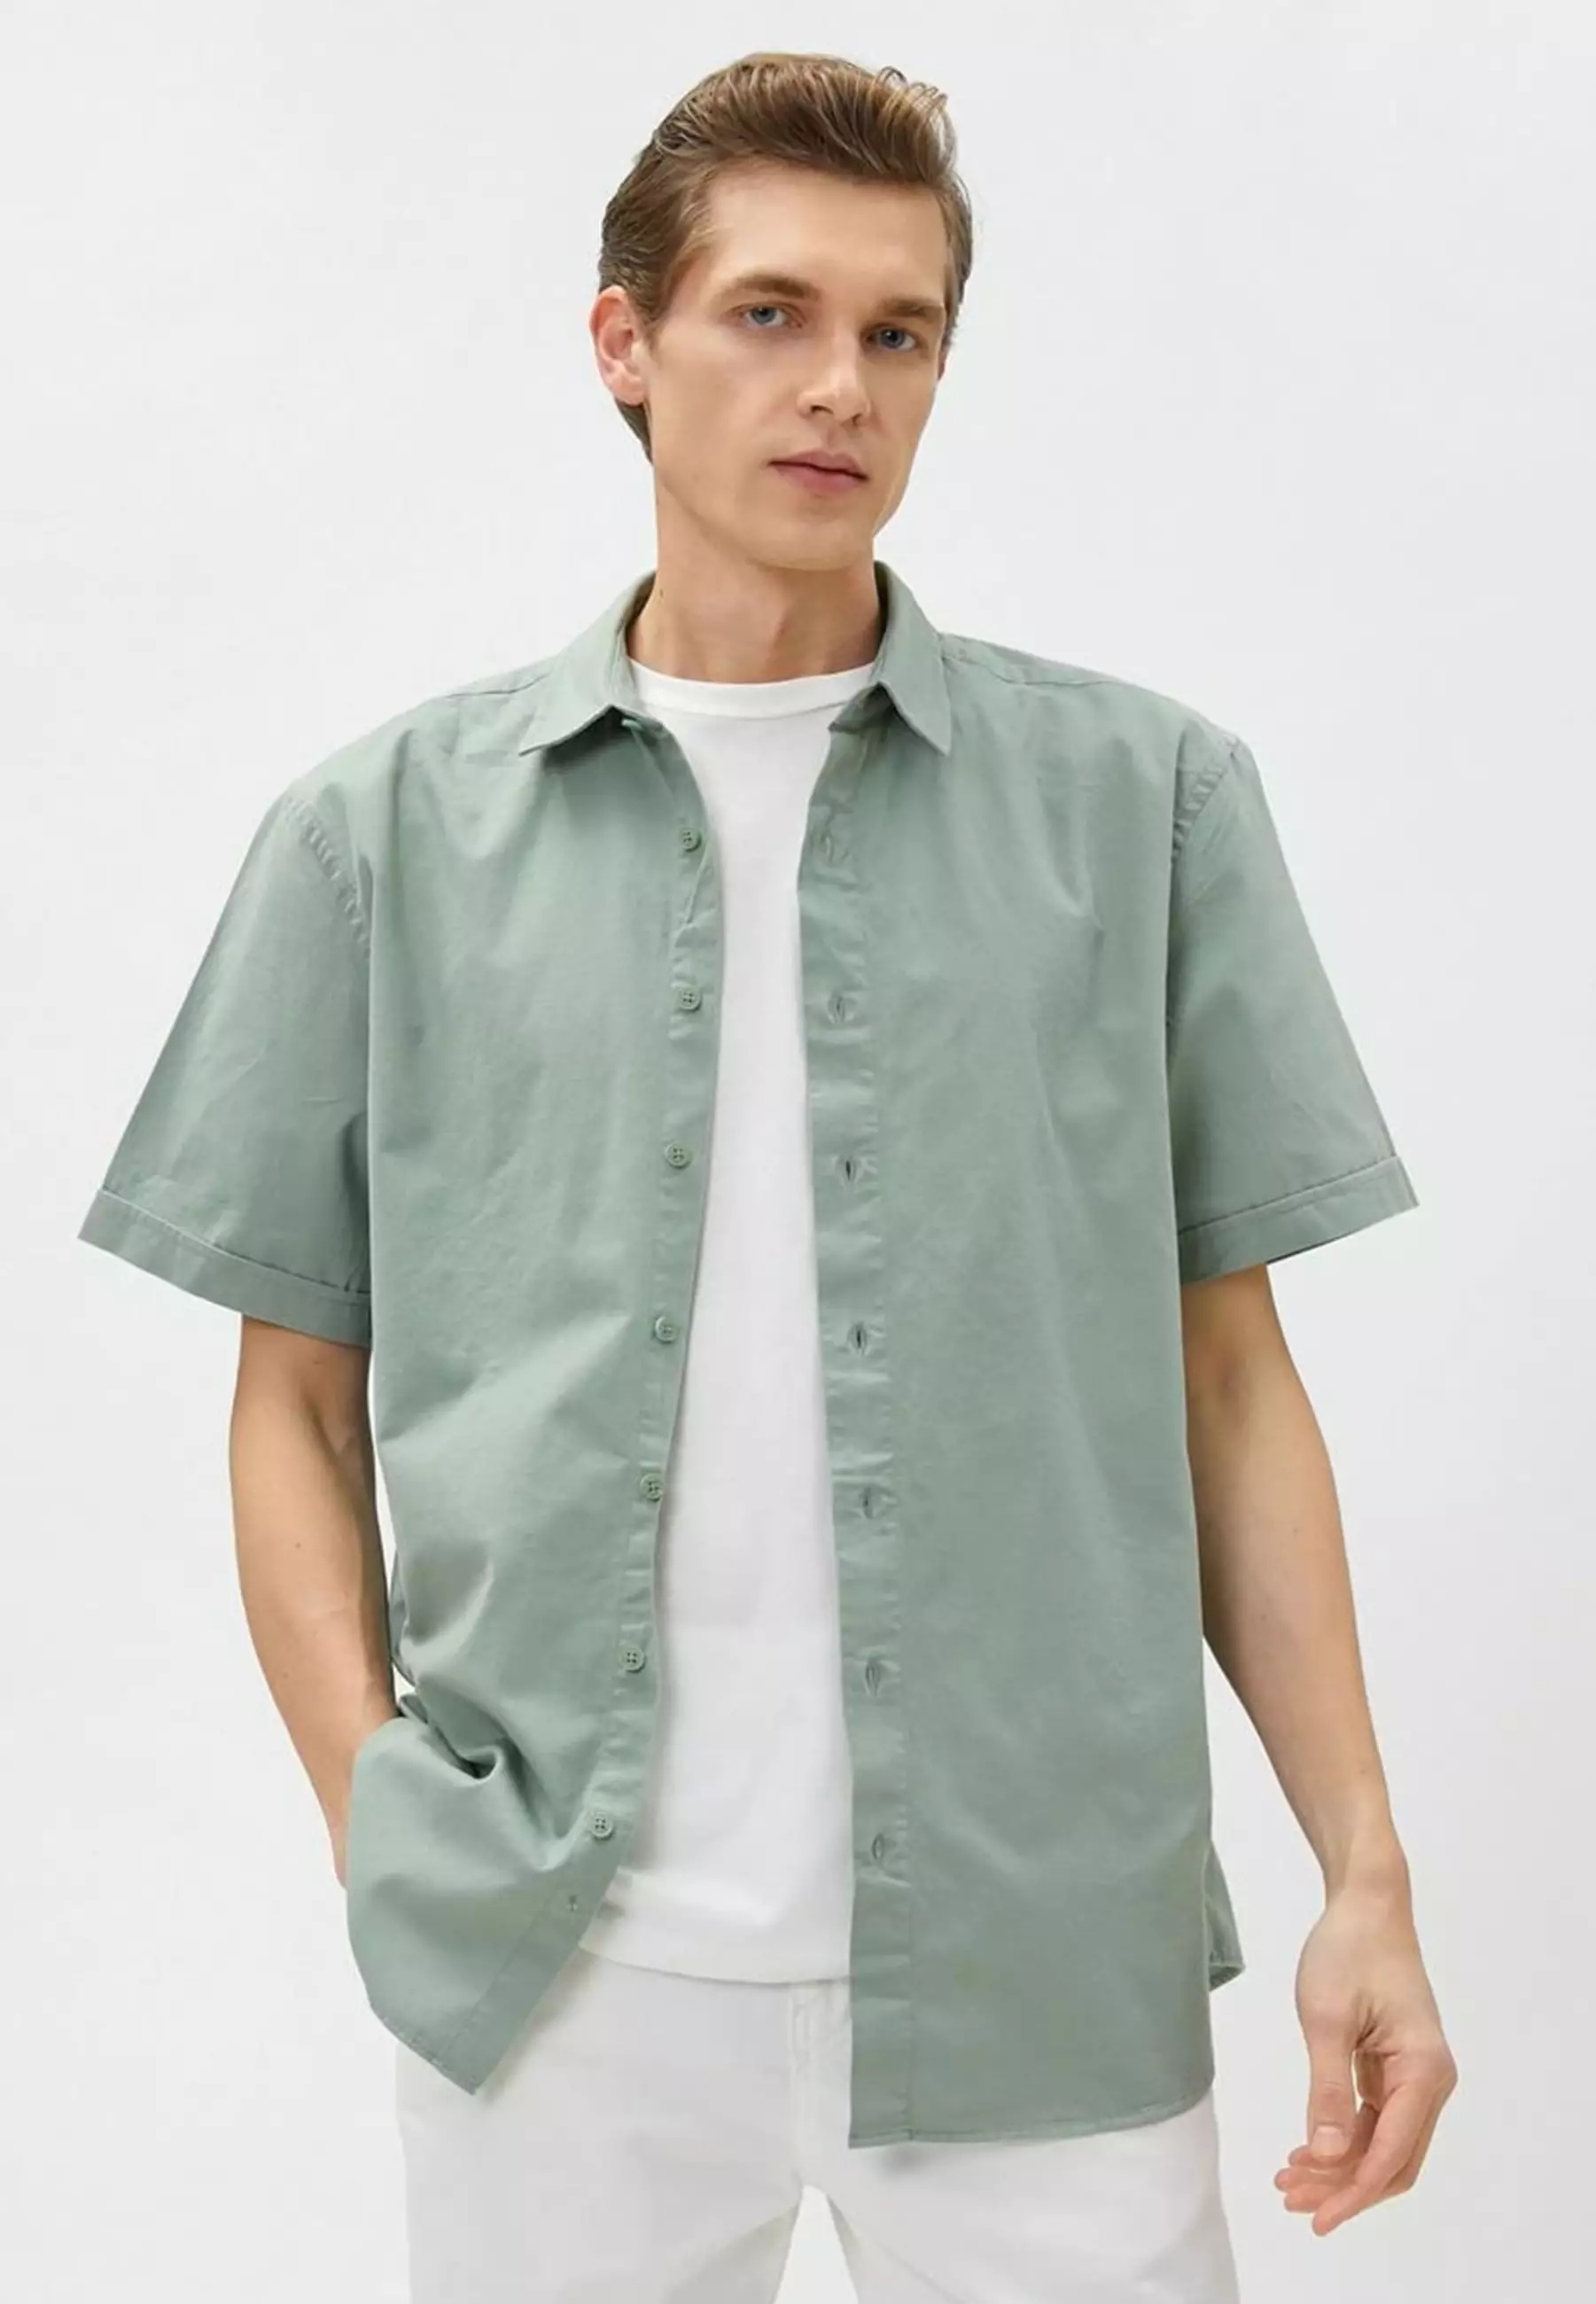 TOPMAN Slim Fit Contrast Cuff Short Sleeve Button-up Shirt in Blue